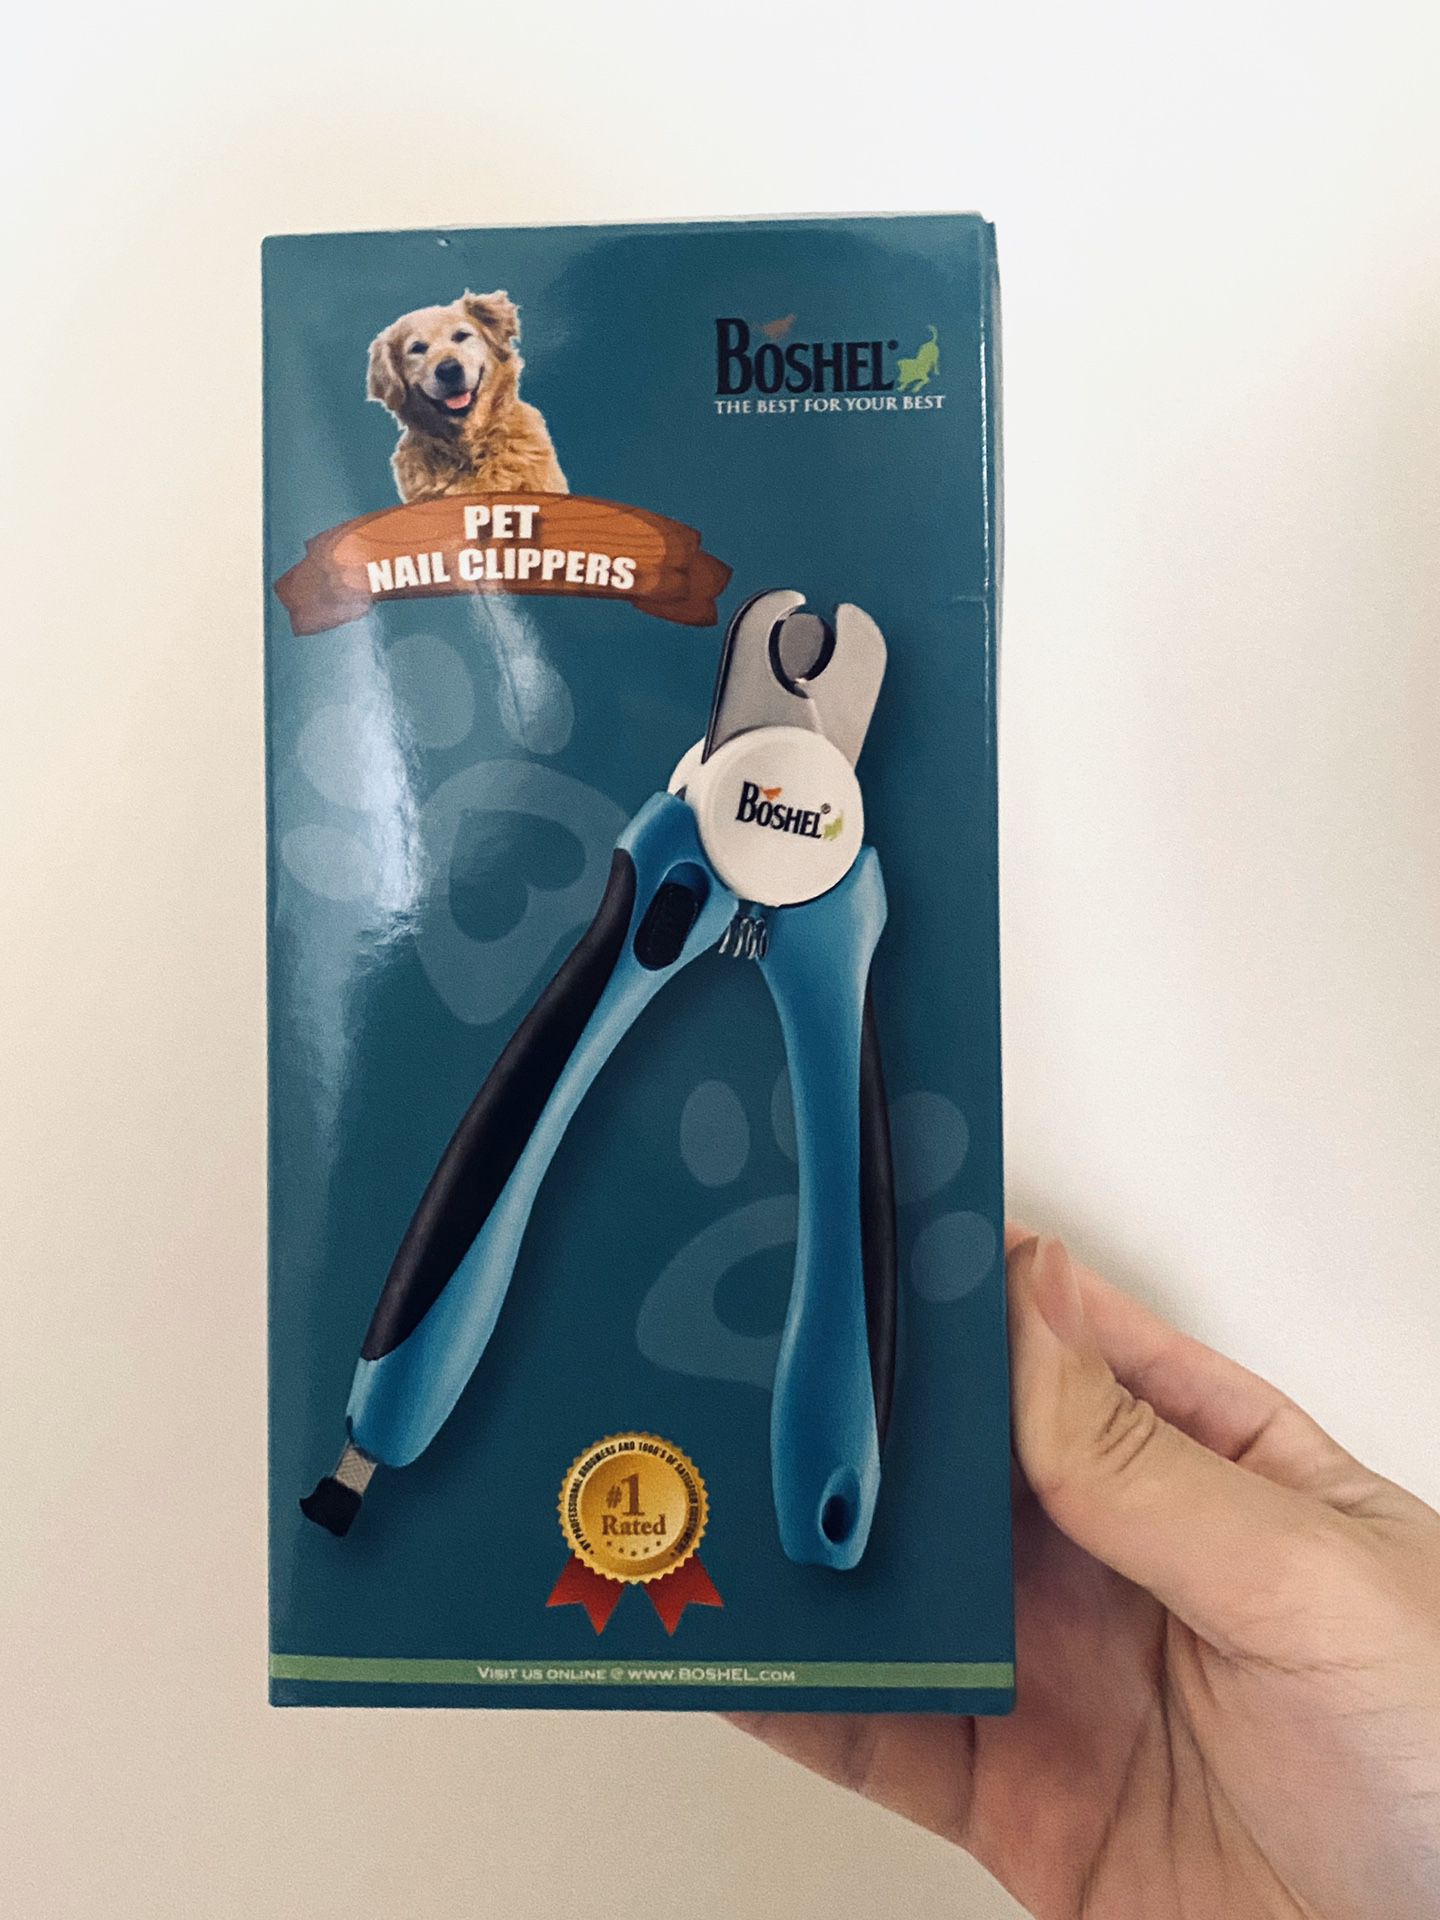 BOSHEL Dog Nail Clippers and Trimmer with Safety Guard to Avoid Over-Cutting Nails & Free Nail File - Razor Sharp Blades - Sturdy Non Slip Handles -